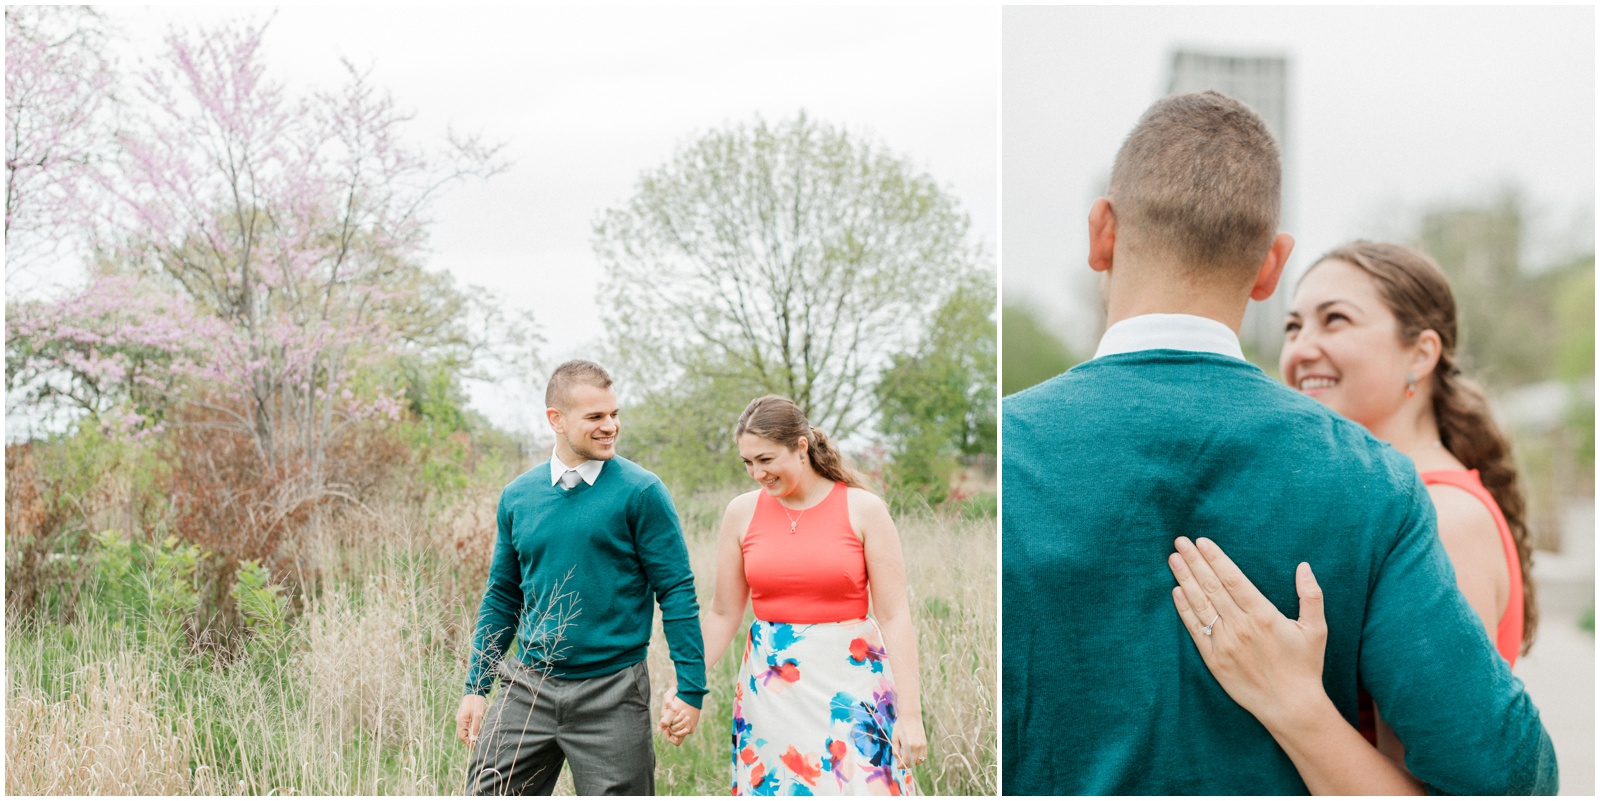 Colorful Spring Engagement Session | Couple walking through park